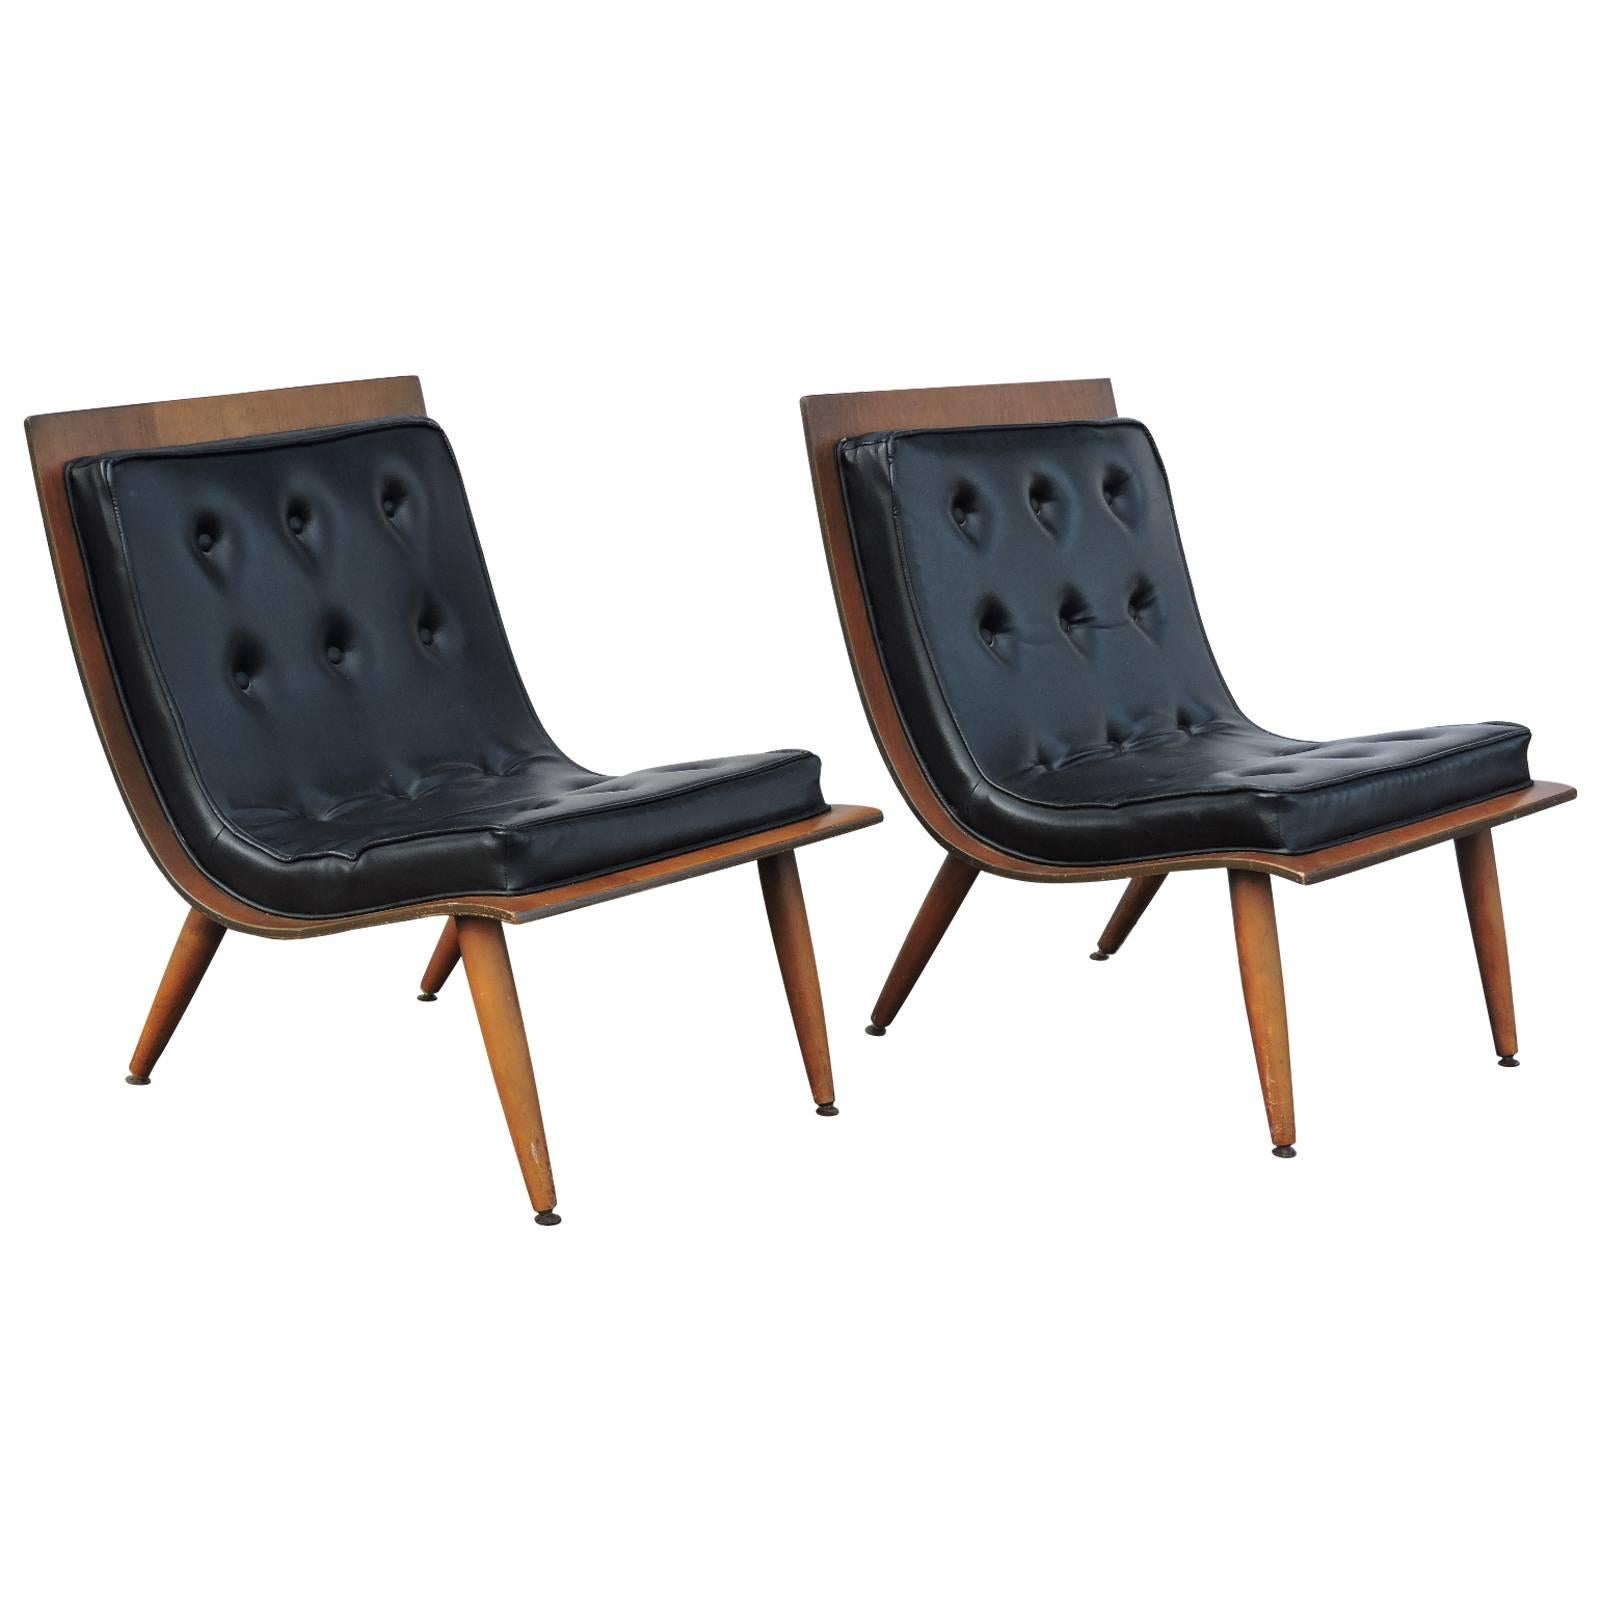 Mid-20th Century Bentwood Scoop Chairs by Carter Brothers